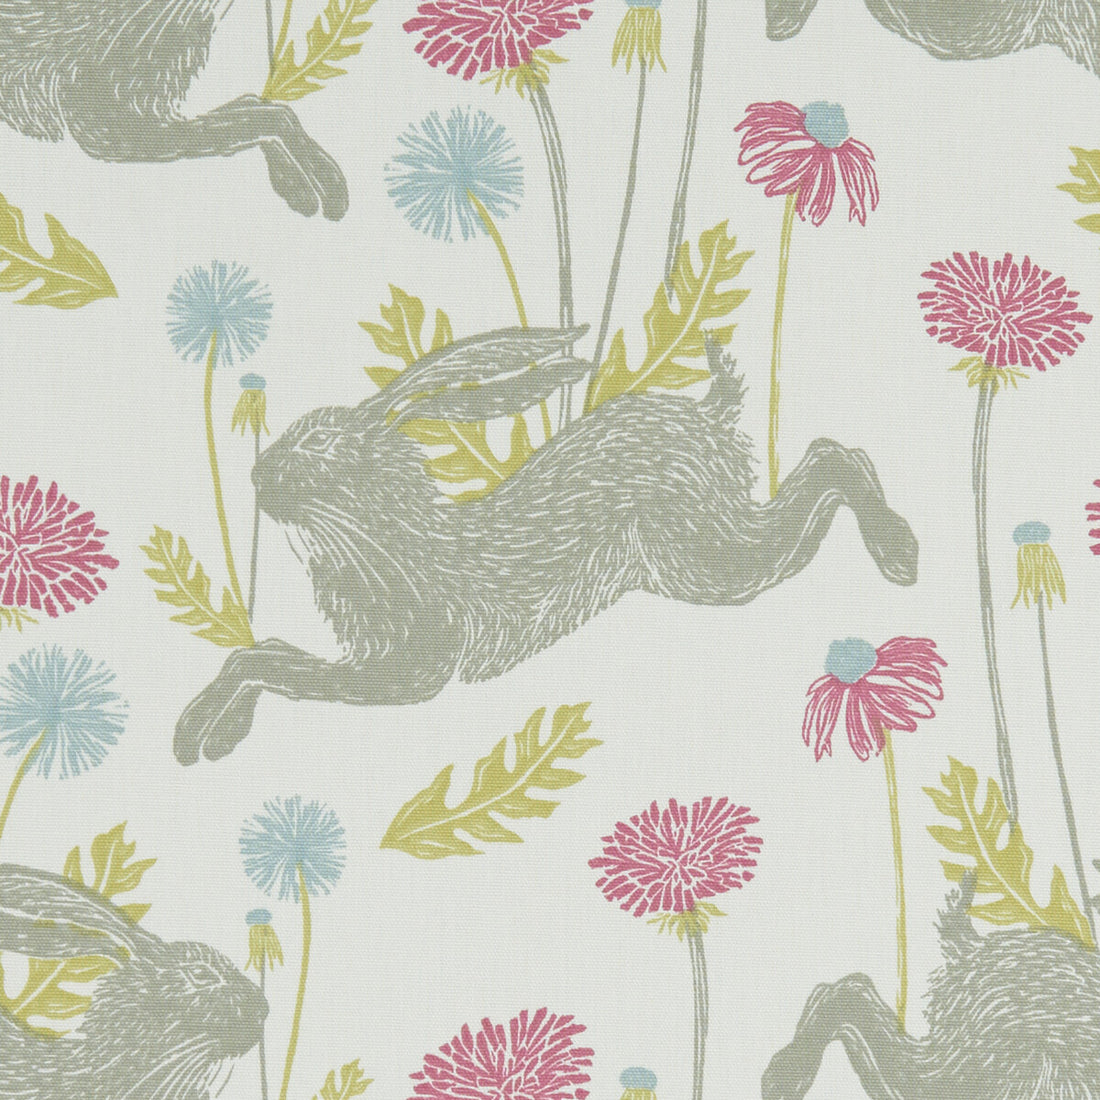 March Hare fabric in summer color - pattern F1190/04.CAC.0 - by Clarke And Clarke in the Land &amp; Sea By Studio G For C&amp;C collection